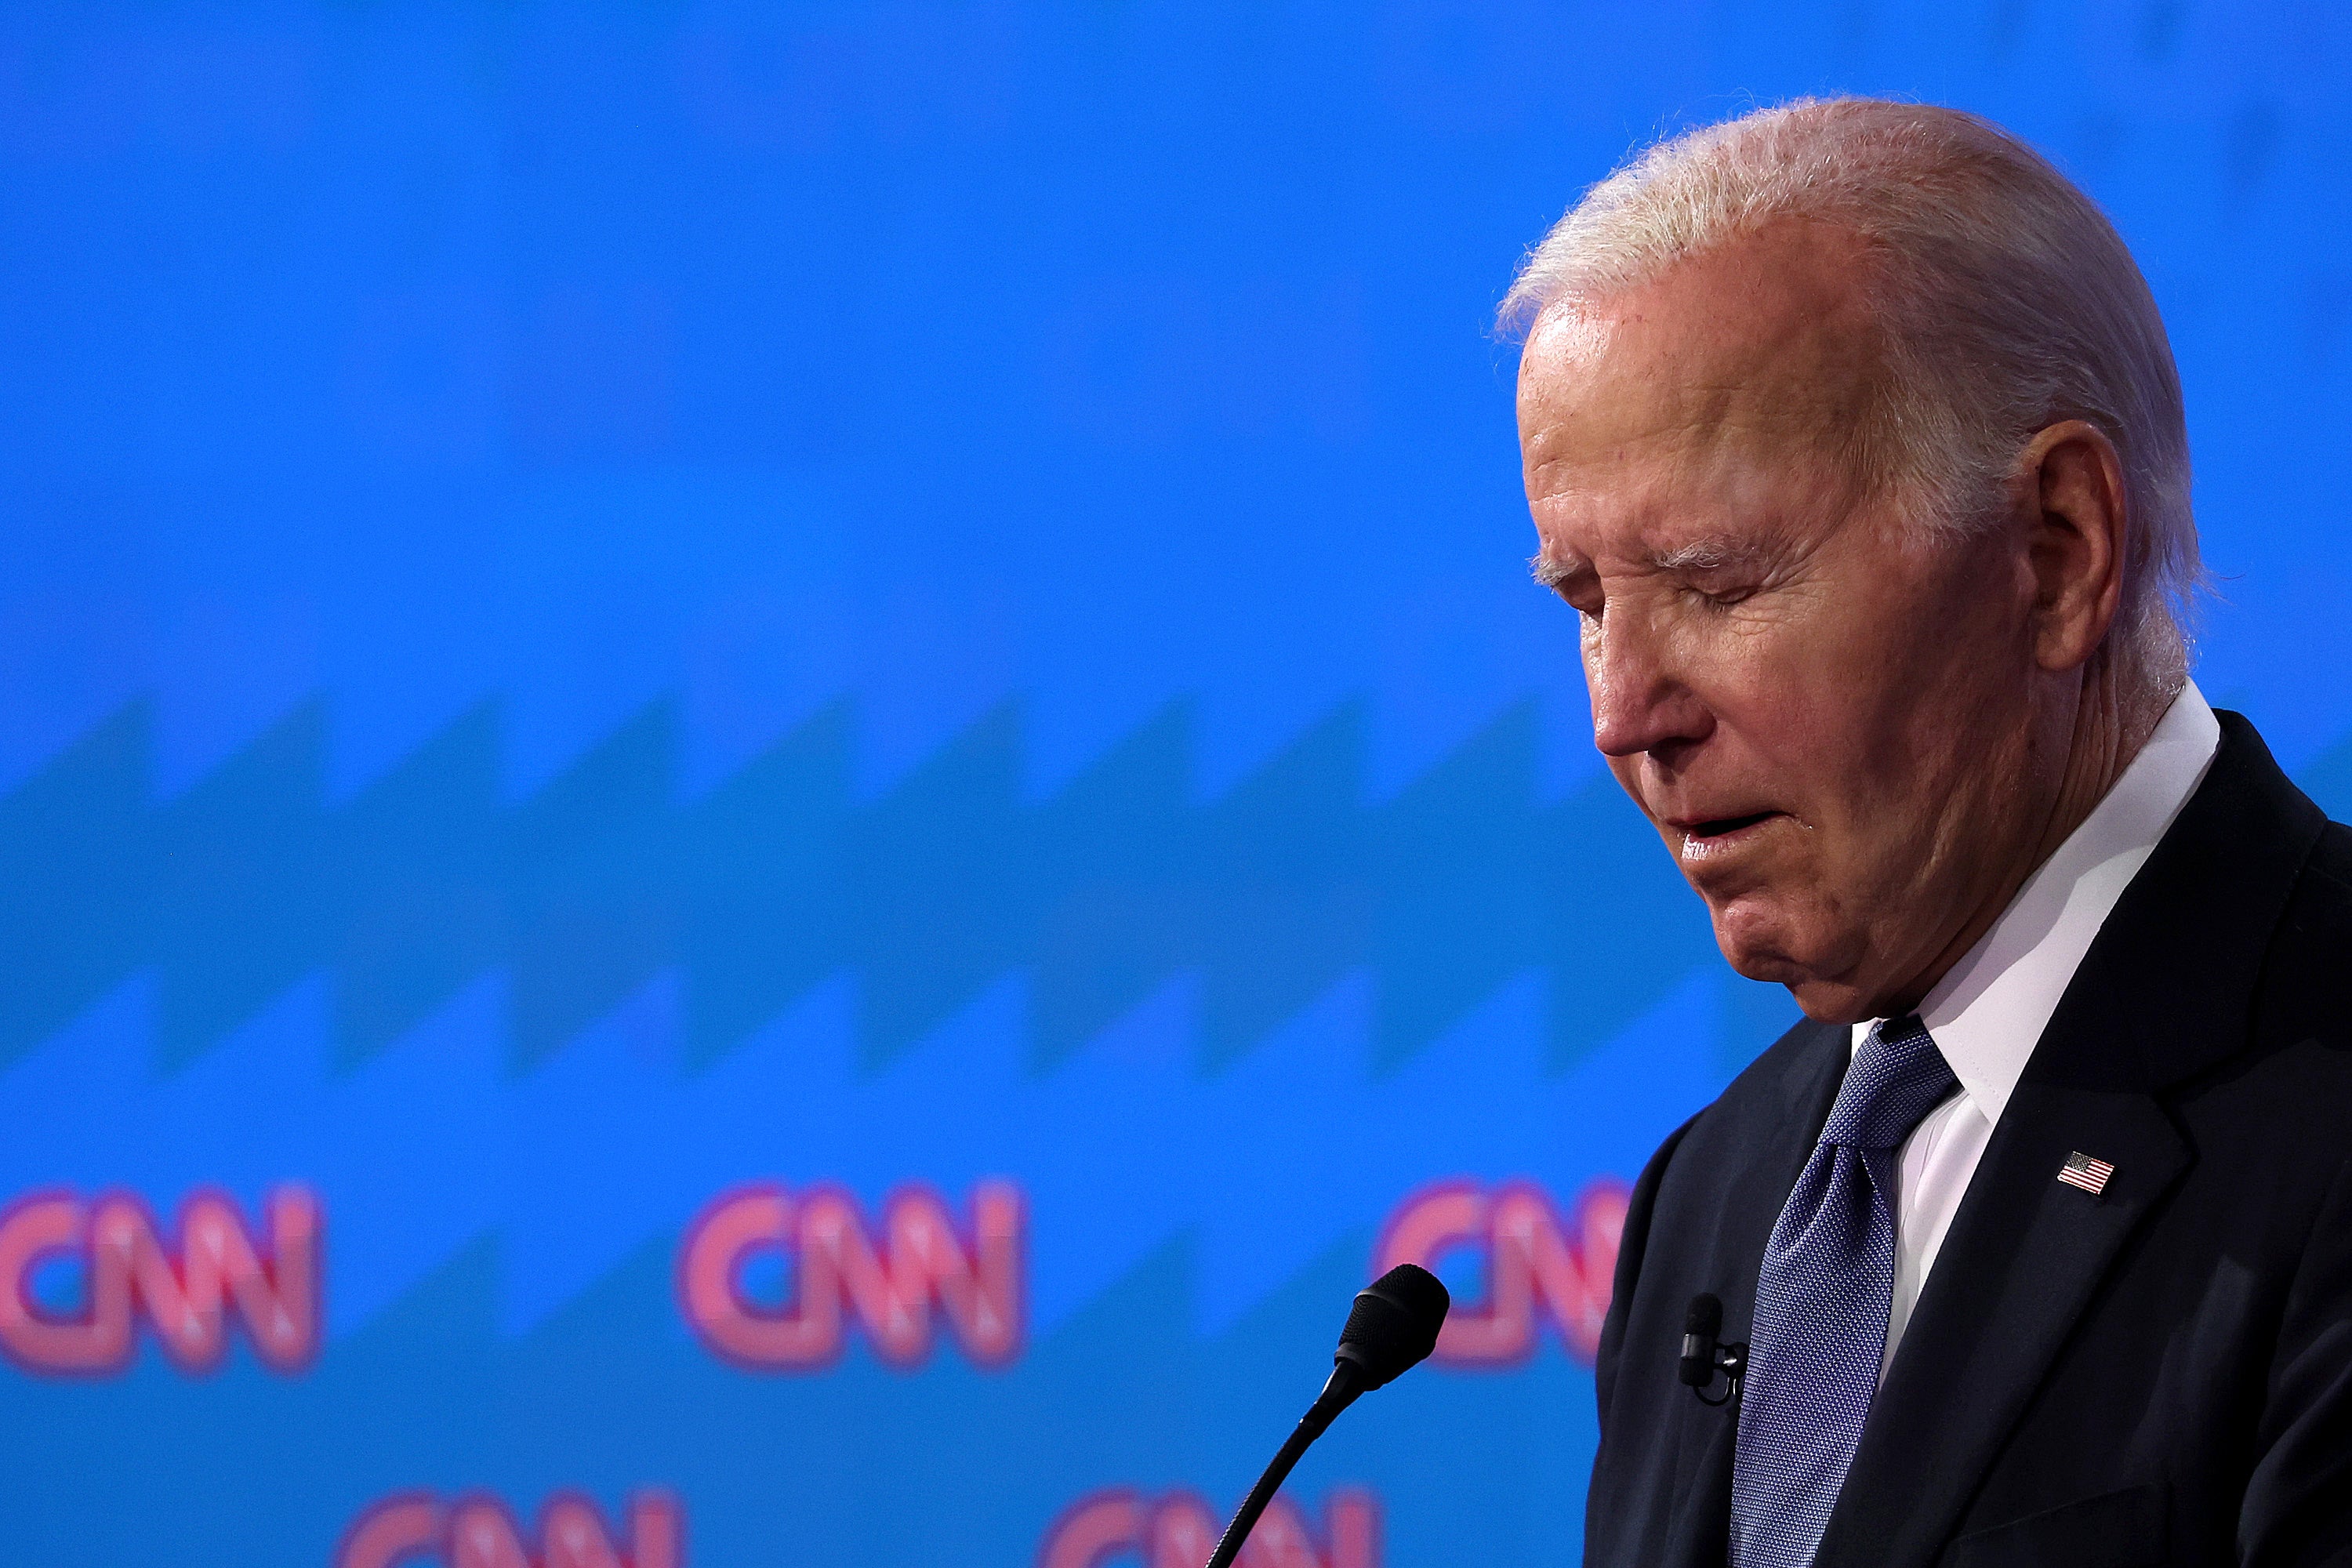 Pressure on Biden to step down from his re-election campaign have intensified in recent days, following his disastrous performance in last Thursday’s debate against Donald Trump